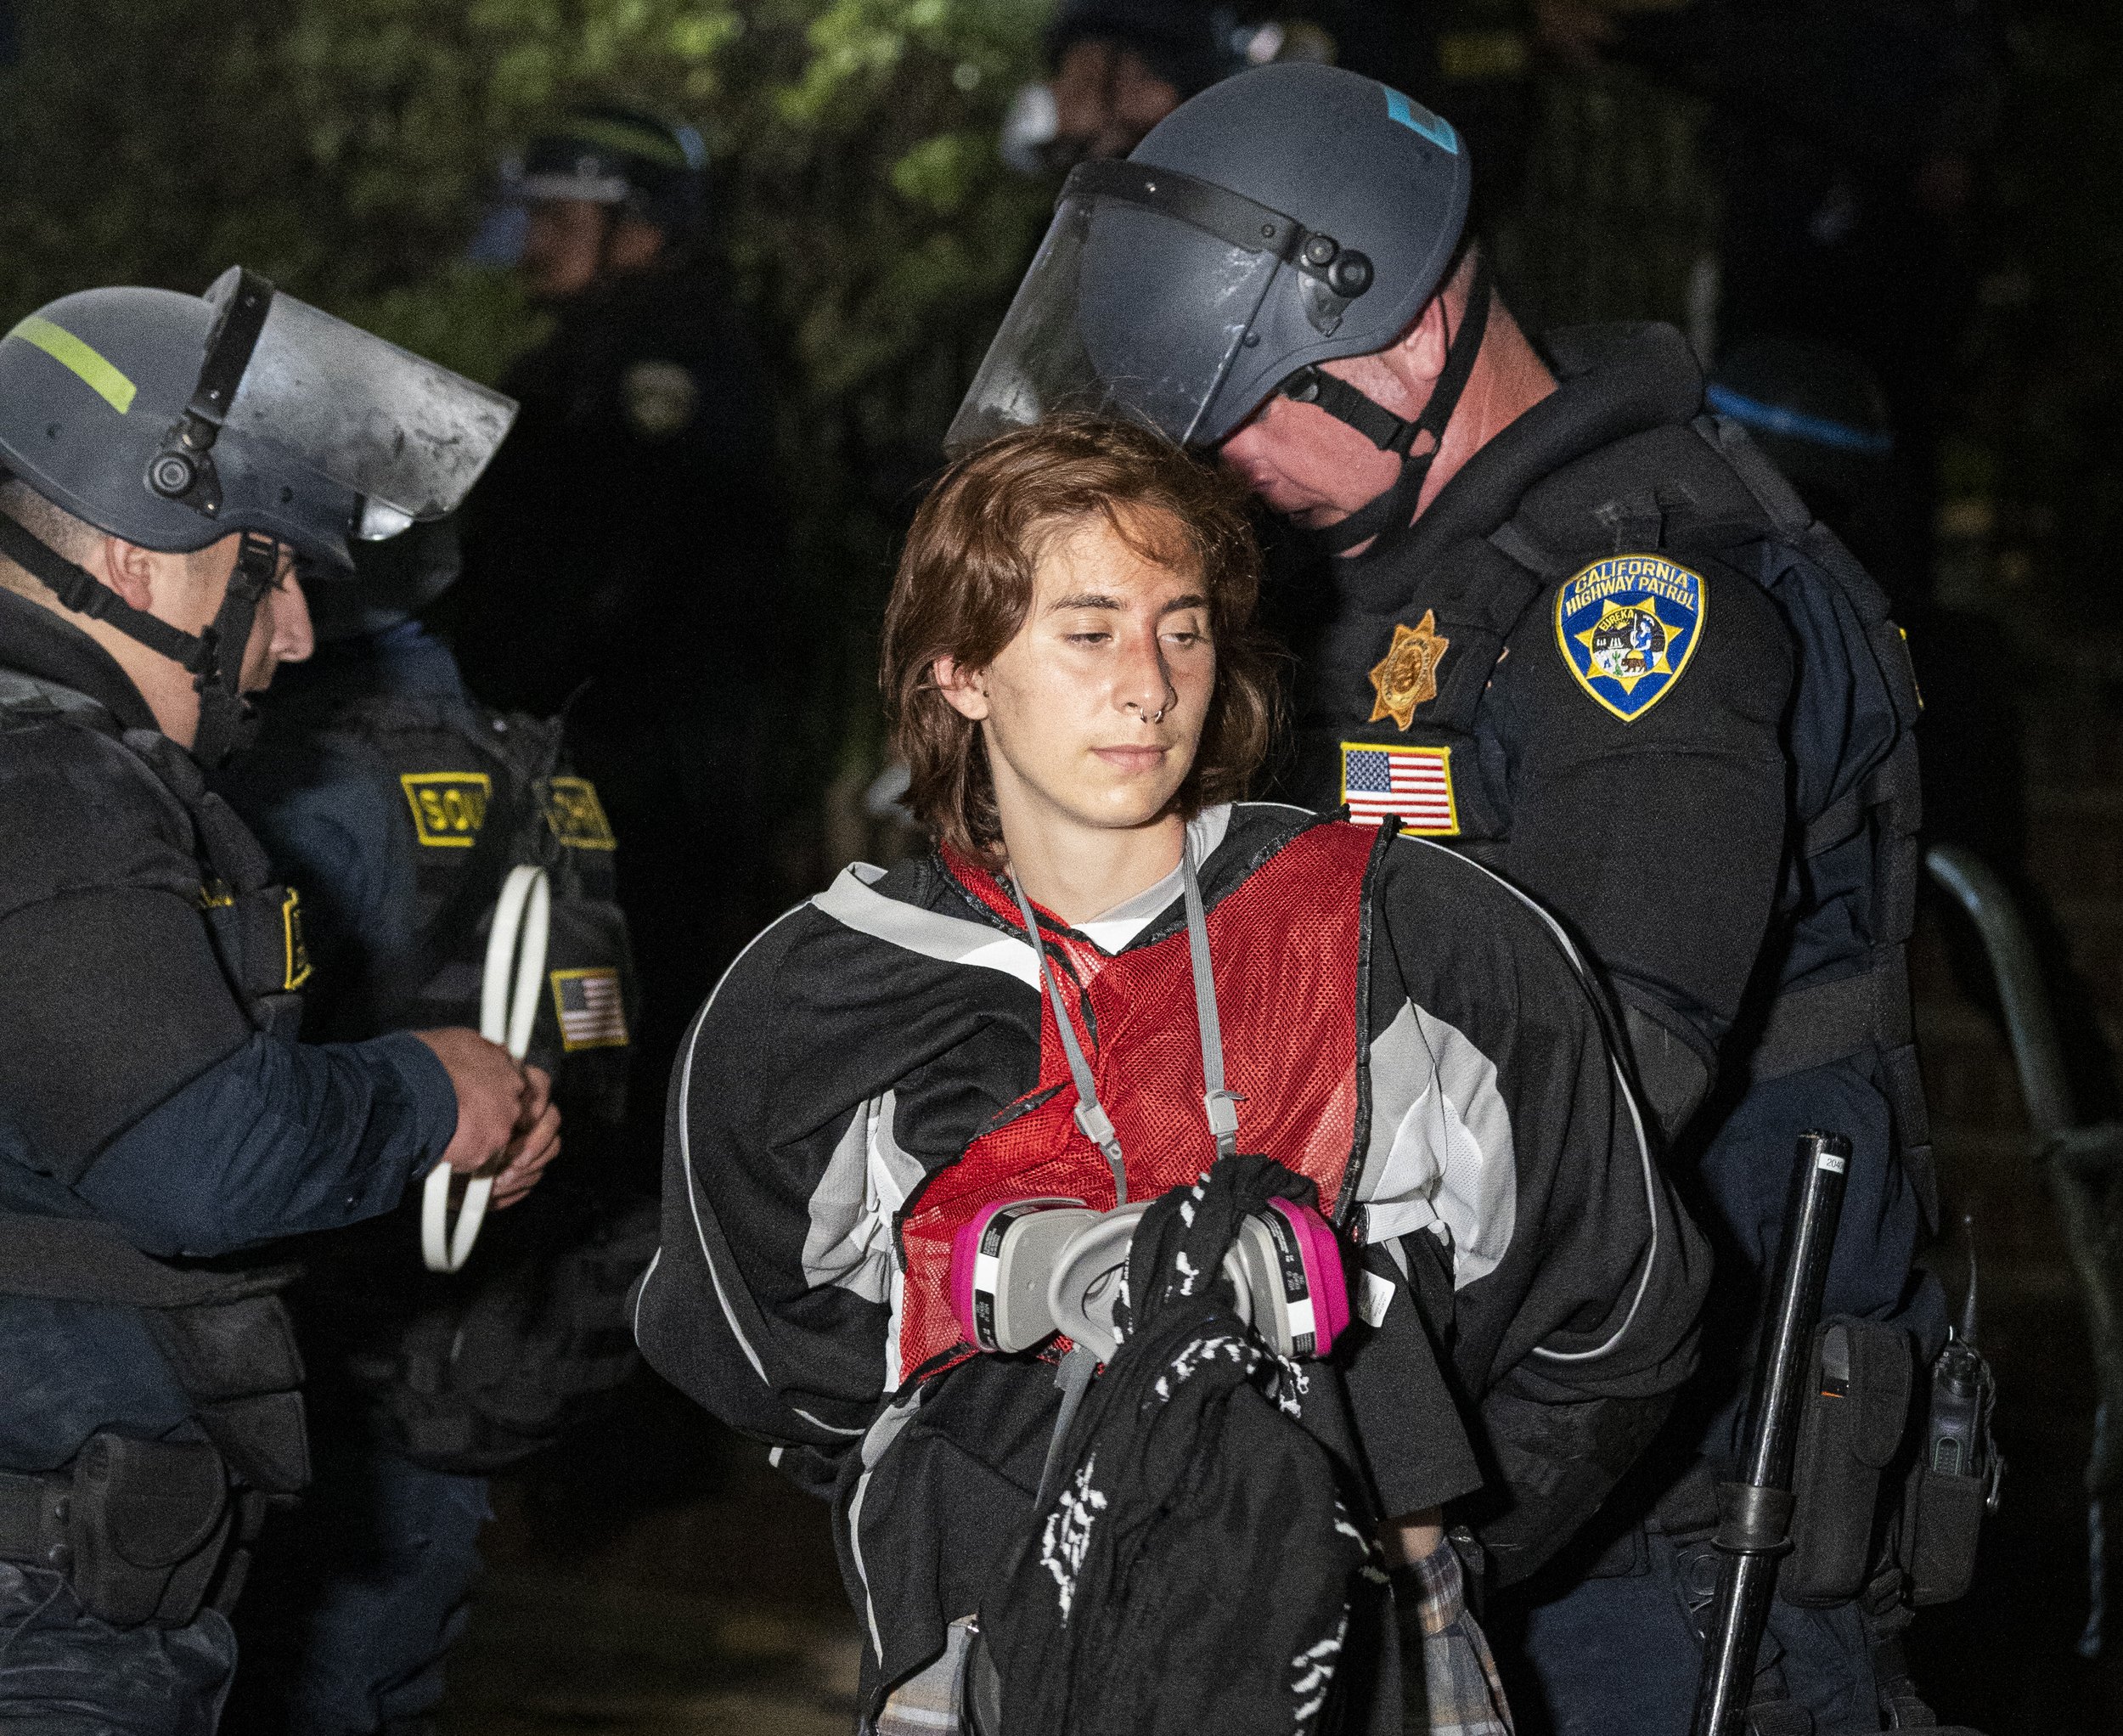  Pro-Palastinian supporter gets arrested by the California Highway Patrol's Special Operations Unit on Wednesday, May 1 at the University of California, Los Angeles in Los Angeles, Calif. (Danilo Perez | The Corsair) 